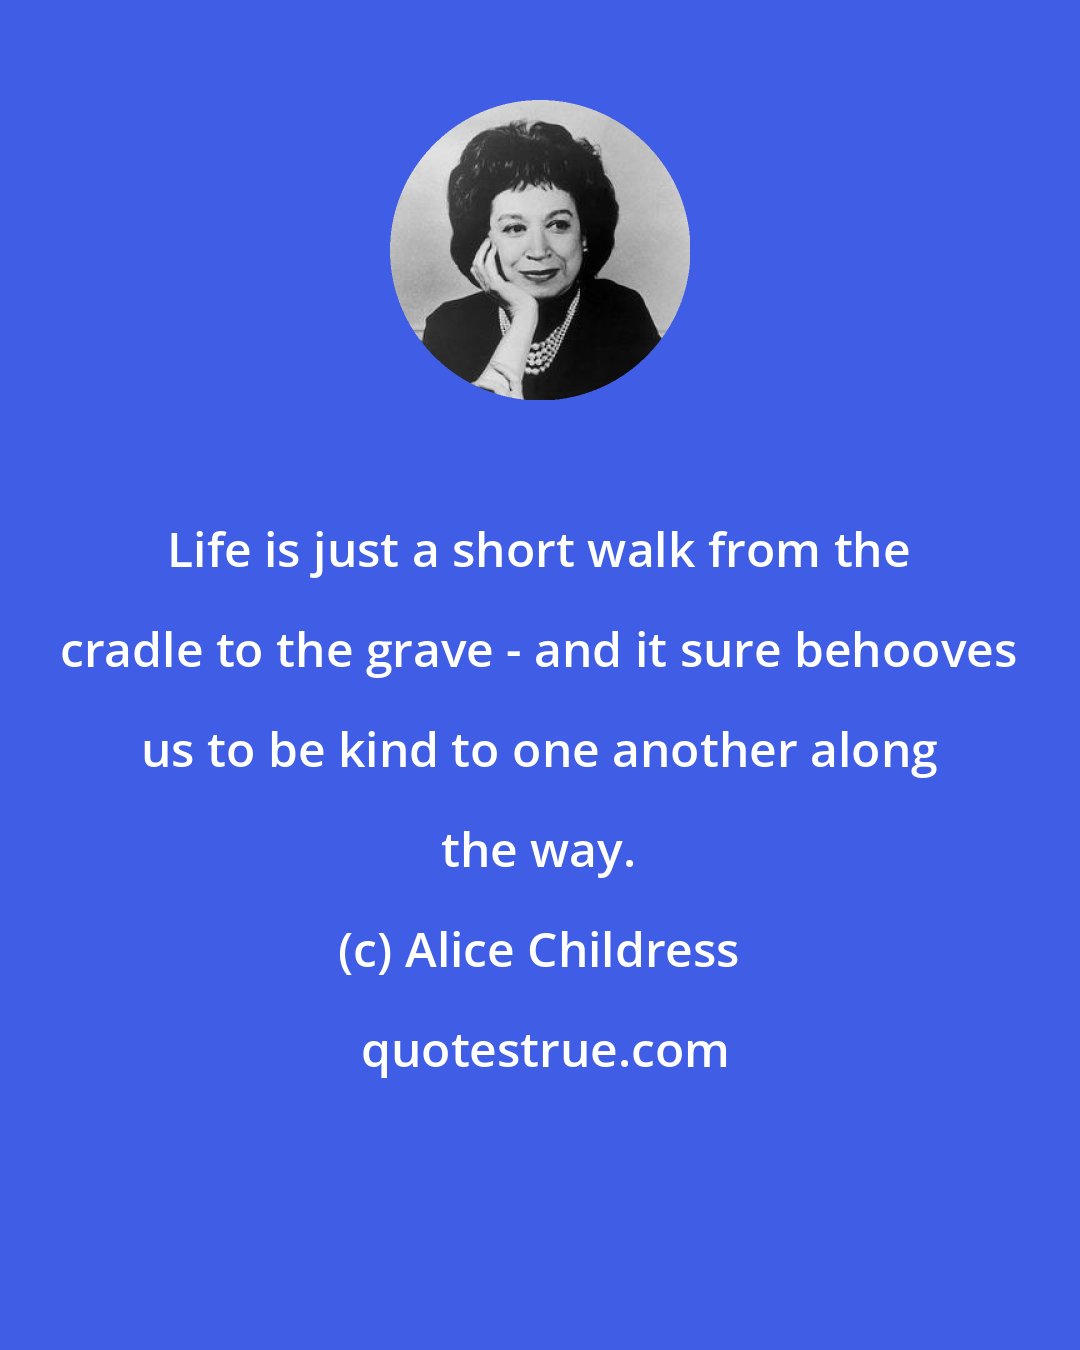 Alice Childress: Life is just a short walk from the cradle to the grave - and it sure behooves us to be kind to one another along the way.